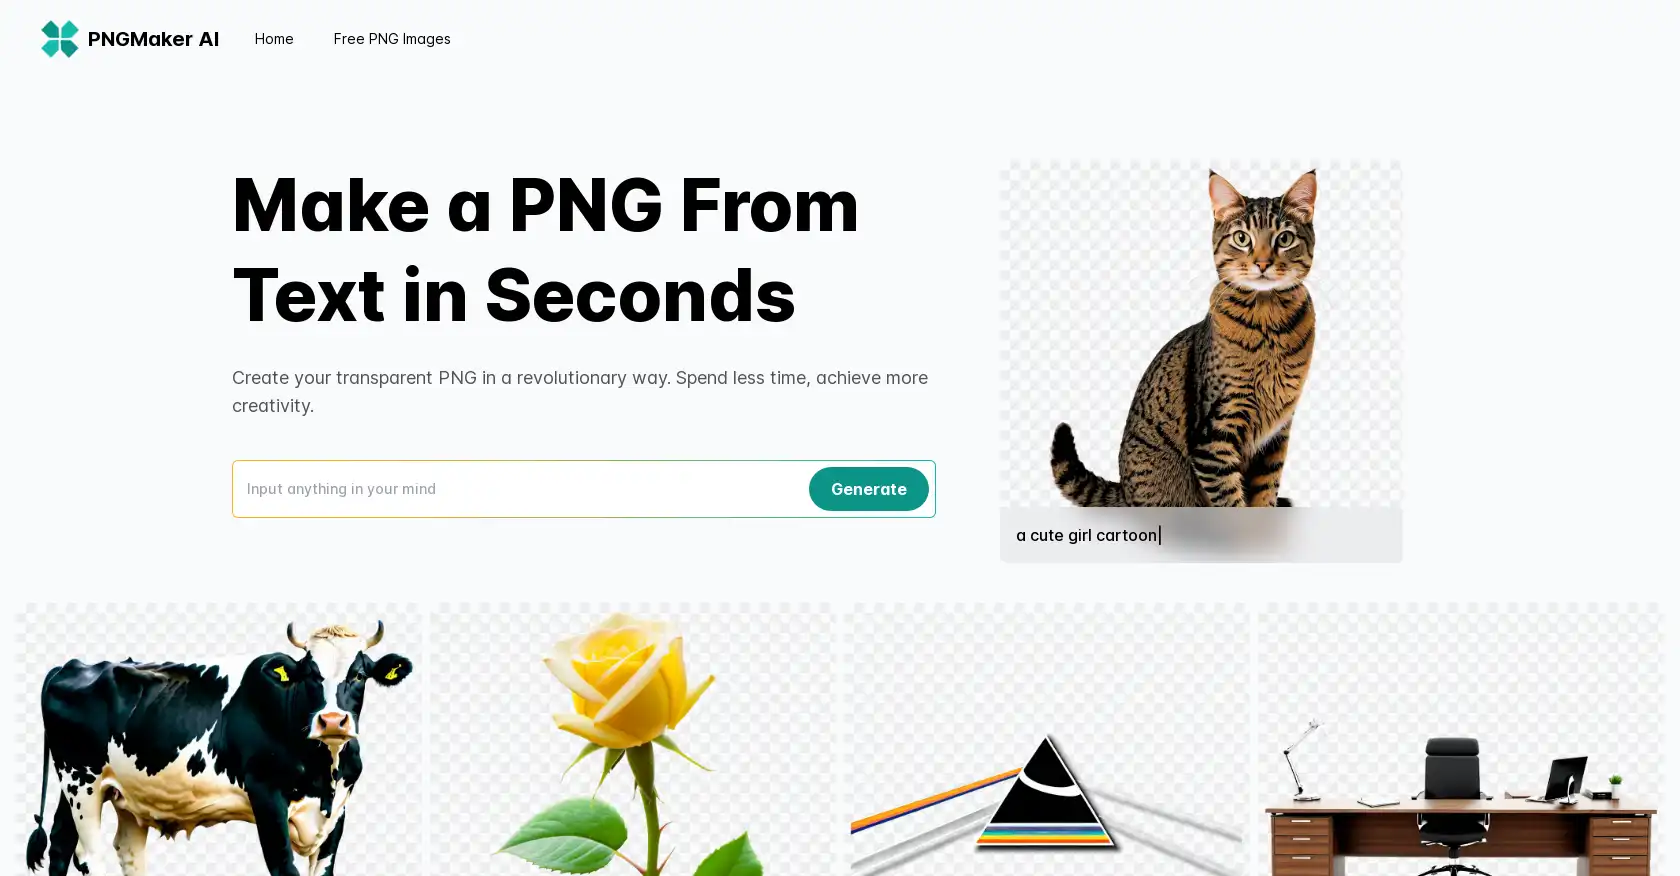 PNGMaker.ai: Make PNG from text in seconds